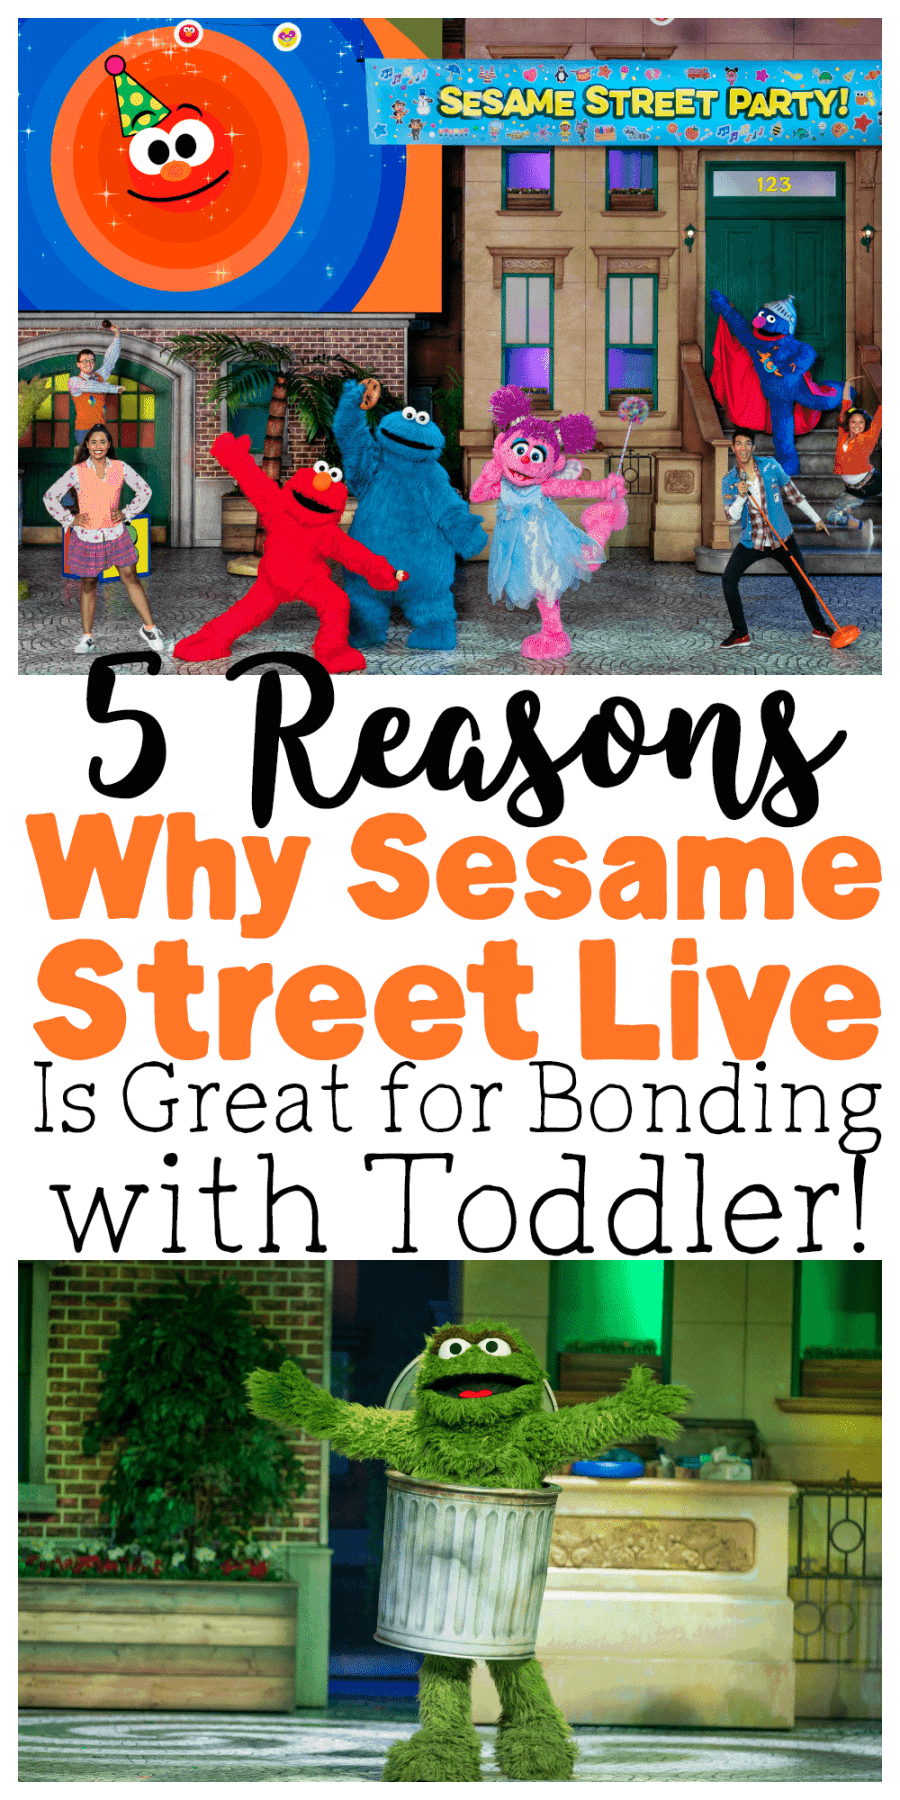 5 Reasons Why Sesame Street Live is Great for Bonding with Toddler